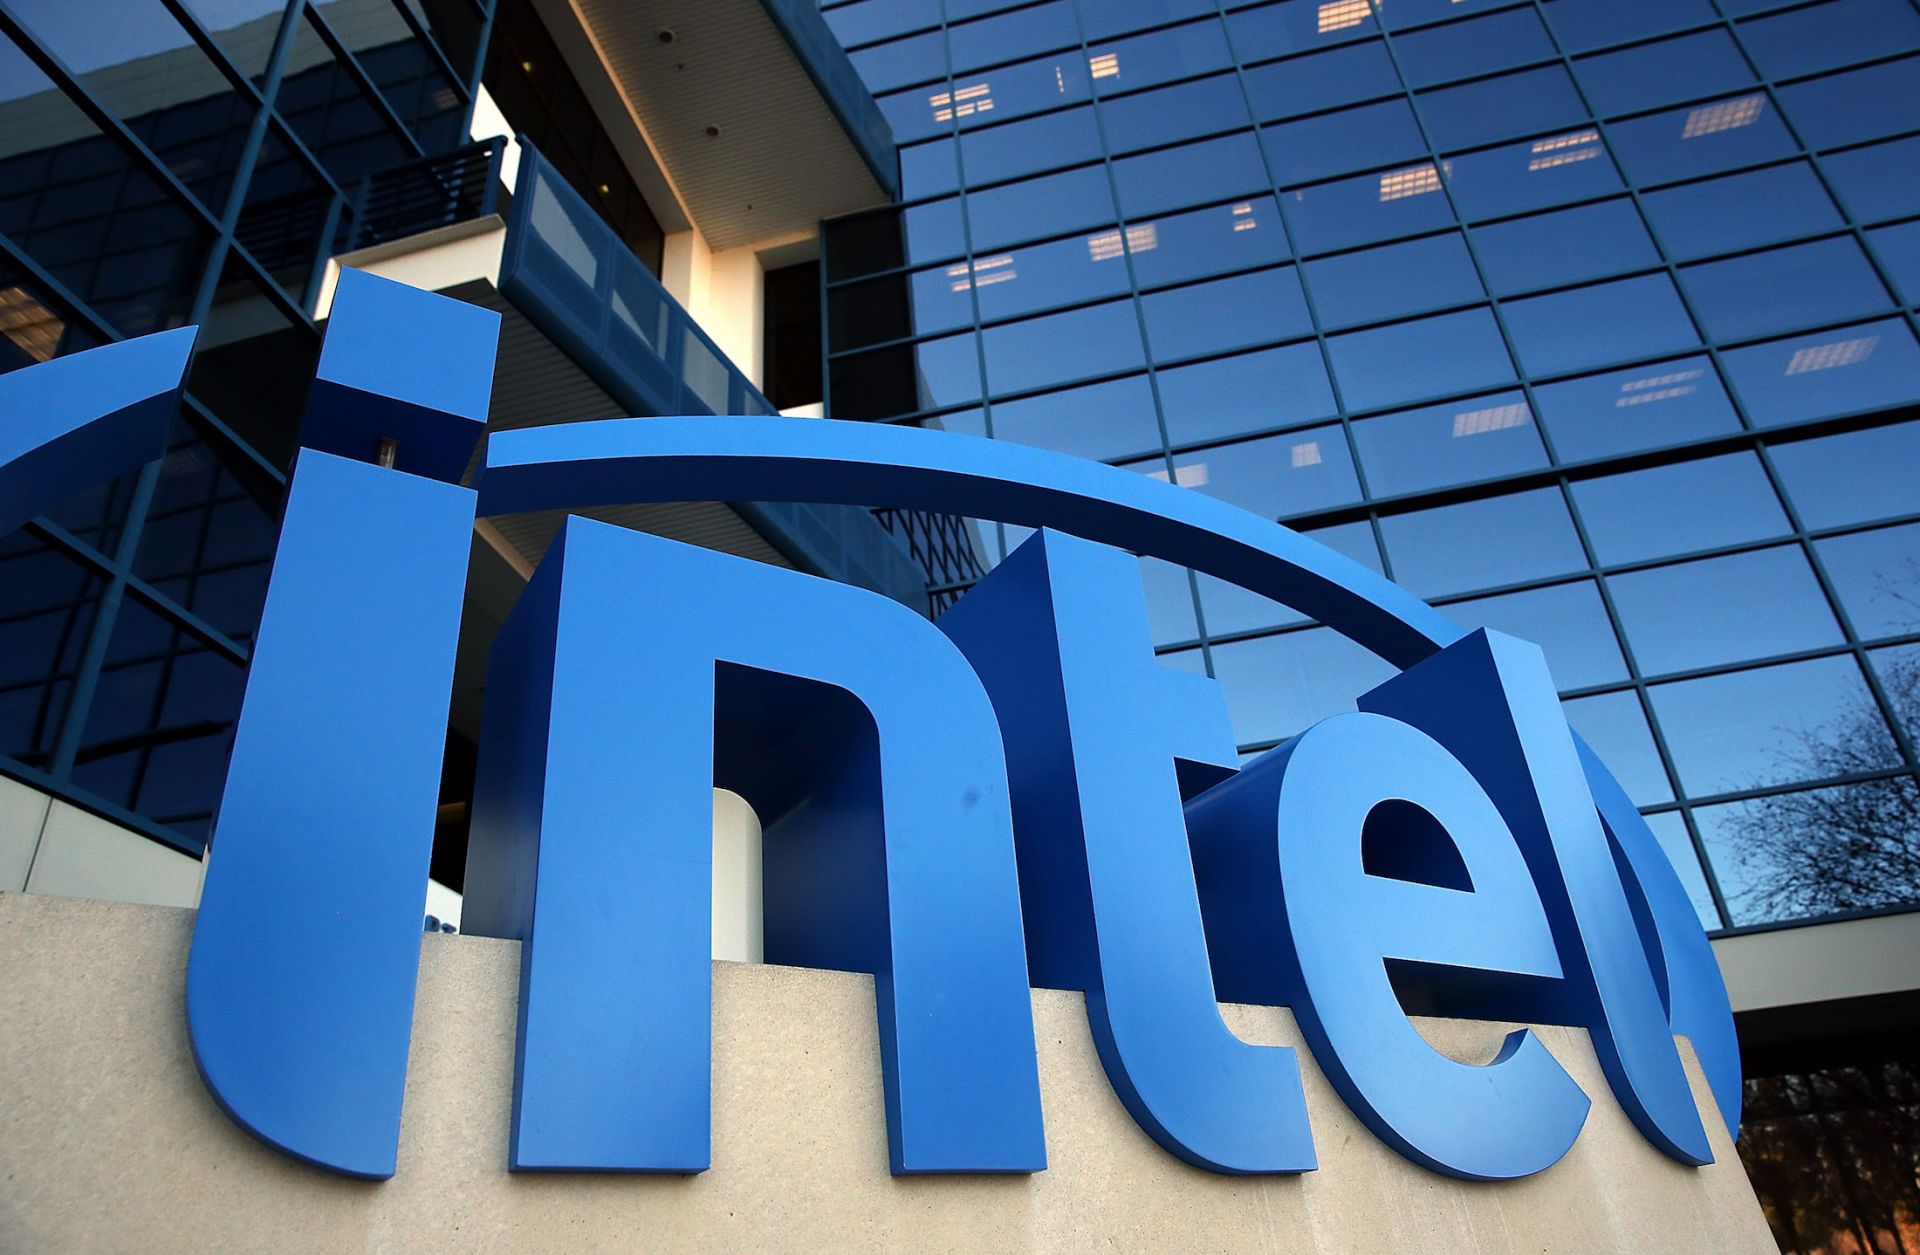 The Intel logo is displayed outside of the company’s headquarters in Santa Clara, California.